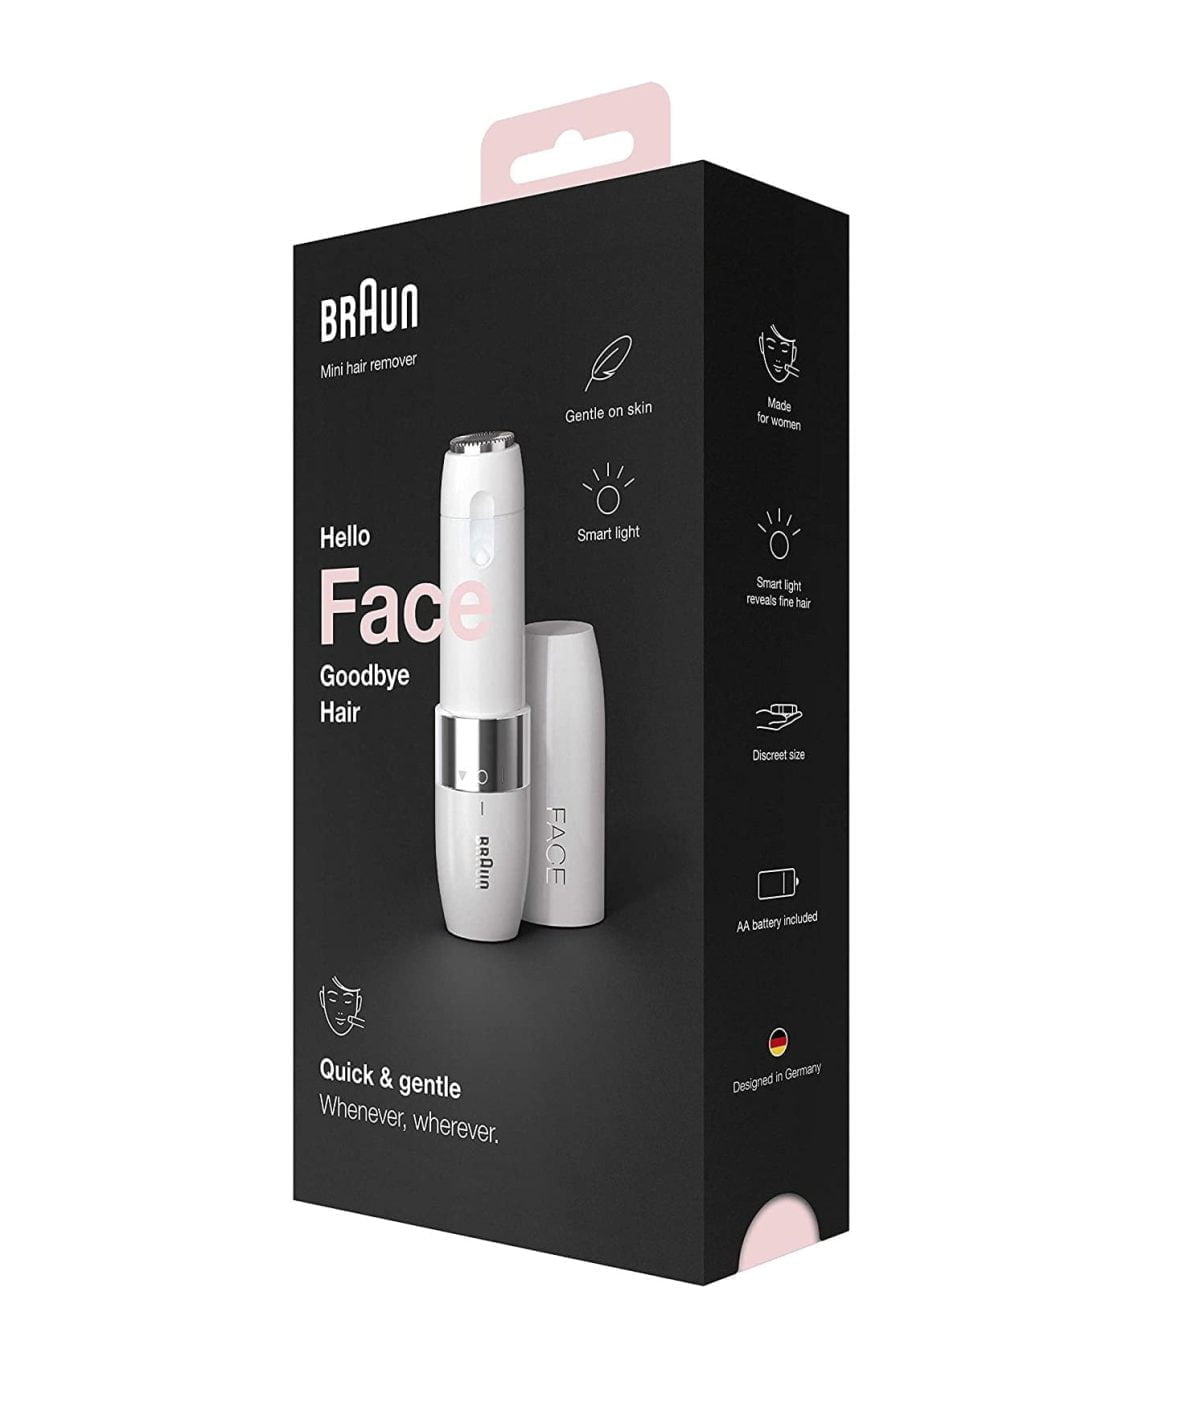 717Cqbkkdwl. Ac Sl1500 Braun &Lt;H1&Gt;Braun Face Mini Hair Remover Fs1000, Electric Facial Hair Removal For Women, White&Lt;/H1&Gt; Https://Www.youtube.com/Watch?V=Muwjqxidwc8 &Lt;Ul Class=&Quot;A-Unordered-List A-Vertical A-Spacing-Mini&Quot;&Gt; &Lt;Li&Gt;&Lt;Span Class=&Quot;A-List-Item&Quot;&Gt; Smooth Skin: Shaves Hair Cleanly And Close To The Skin, For Easier Makeup Application &Lt;/Span&Gt;&Lt;/Li&Gt; &Lt;Li&Gt;&Lt;Span Class=&Quot;A-List-Item&Quot;&Gt; Gentle &Amp; Discreet: Built For Efficient And Sensitive Facial Hair Removal For Women &Lt;/Span&Gt;&Lt;/Li&Gt; &Lt;Li&Gt;&Lt;Span Class=&Quot;A-List-Item&Quot;&Gt; Quick &Amp; Easy: Mini-Sized Design For Portability - Efficient Facial Hair Removal Anytime, Anywhere &Lt;/Span&Gt;&Lt;/Li&Gt; &Lt;Li&Gt;&Lt;Span Class=&Quot;A-List-Item&Quot;&Gt; Precise: Spot And Isolate Hairs With The Facial Hair Remover'S Built-In Smart Light &Lt;/Span&Gt;&Lt;/Li&Gt; &Lt;Li&Gt;&Lt;Span Class=&Quot;A-List-Item&Quot;&Gt; Versatile: This Facial Shaver For Women Is Easily Usable On Tricky Areas Of The Face &Lt;/Span&Gt;&Lt;/Li&Gt; &Lt;/Ul&Gt; Hair Removal Braun Face Mini Hair Remover Fs1000, Electric Facial Hair Removal For Women, White